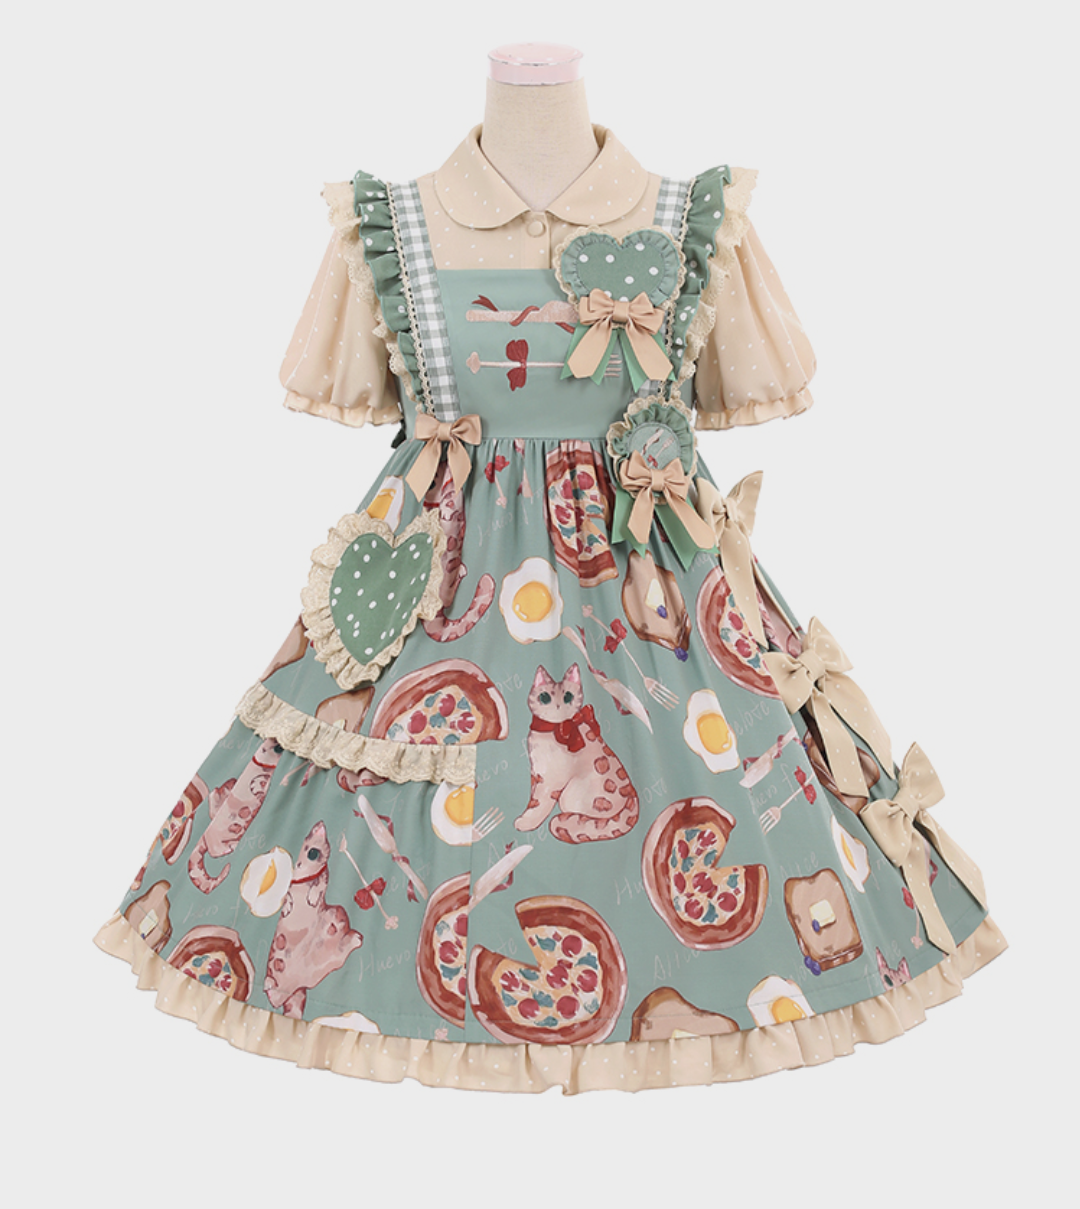 Light blue dress with a pattern of eggs, bacon, and cats 